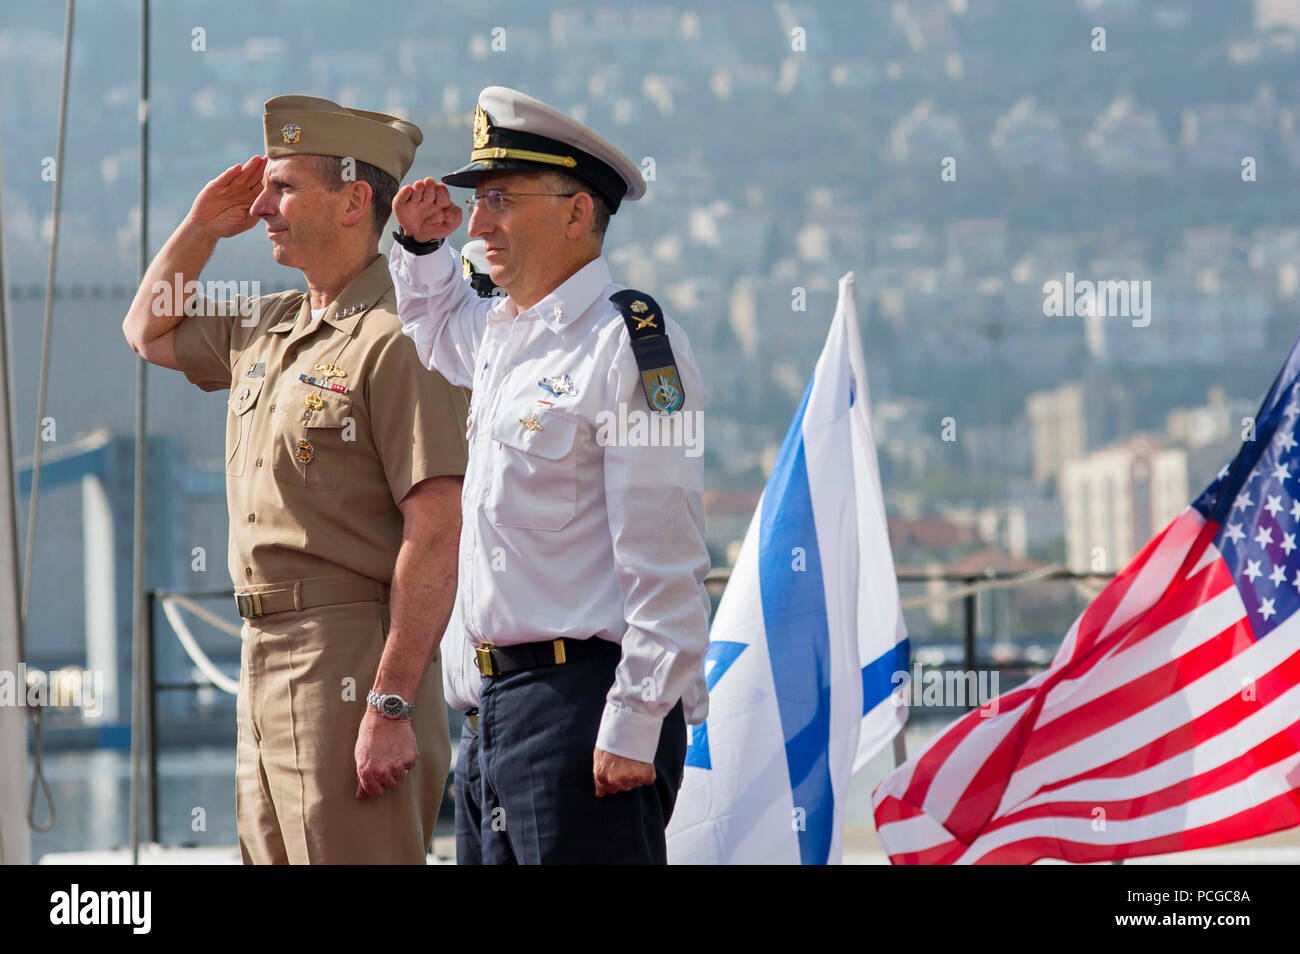 Israel (Nov. 24, 2013) Chief of Naval Operations (CNO) Adm. Jonathan Greenert salutes with the Commander in Chief of the Israel Navy Vice Adm. Ram Rutberg during a full honors ceremony to welcome him upon his arrival at Haifa Naval Base. During the visit, Greenert observed several capabilities demonstrations conducted by the IN and conducted engagement meetings with Israel Defense Force leadership. Stock Photo